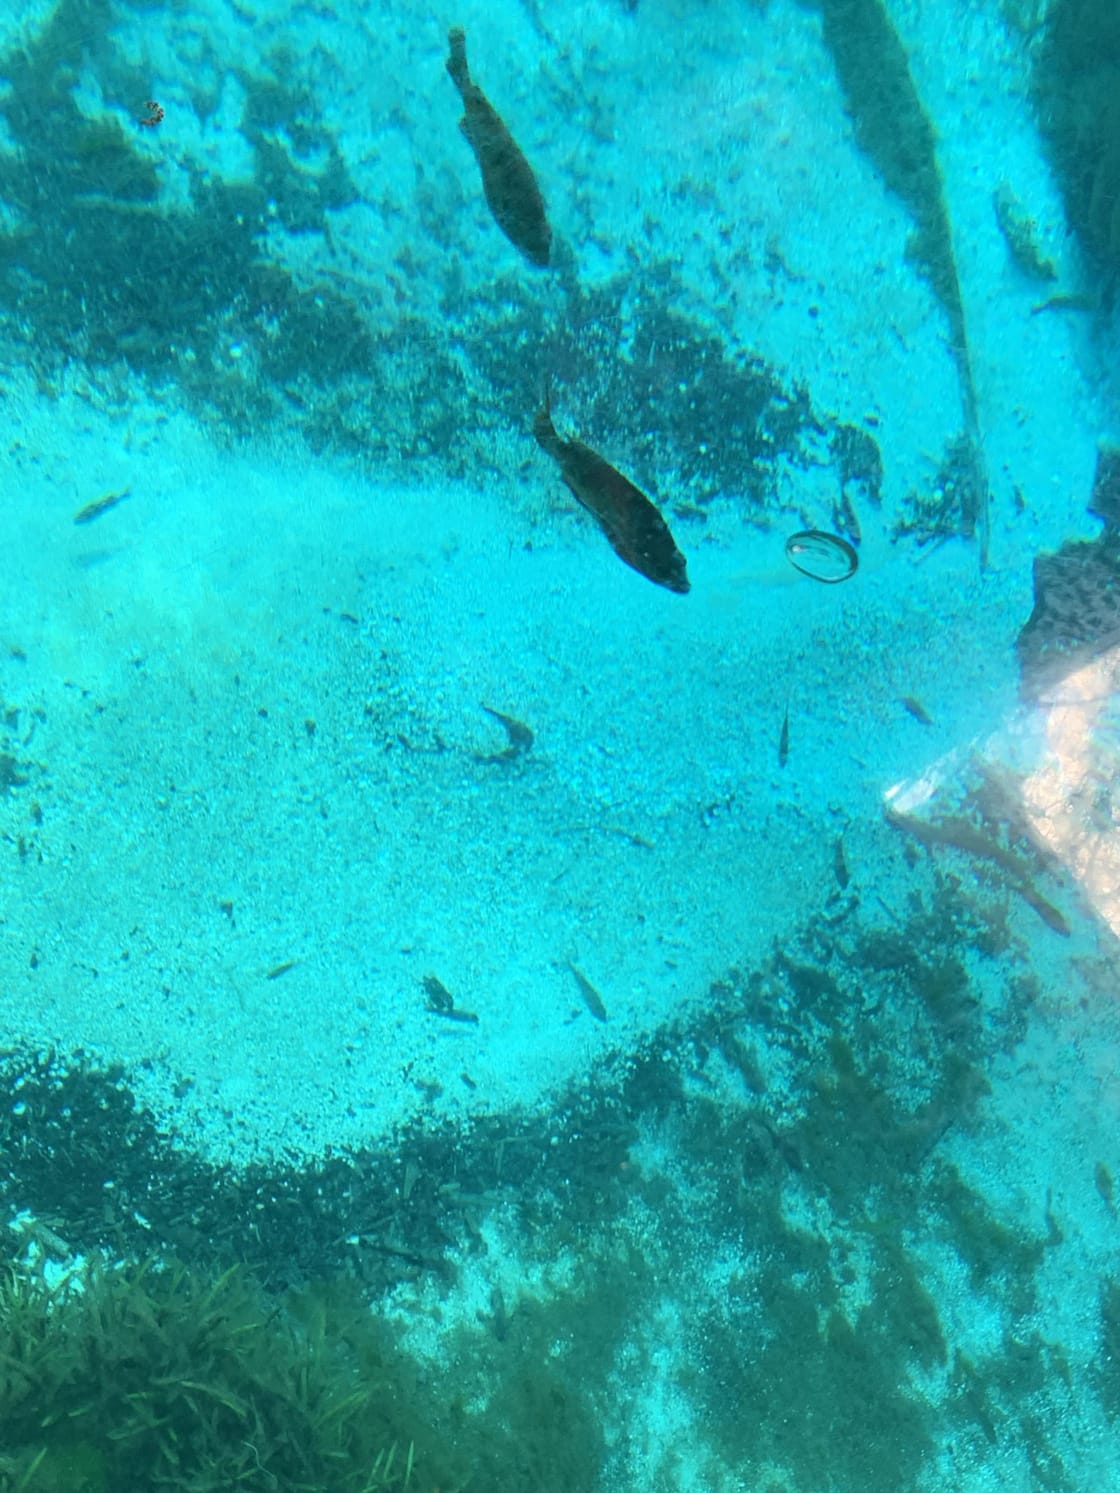 The glass bottom boat ride was amazing which is close by the campsite